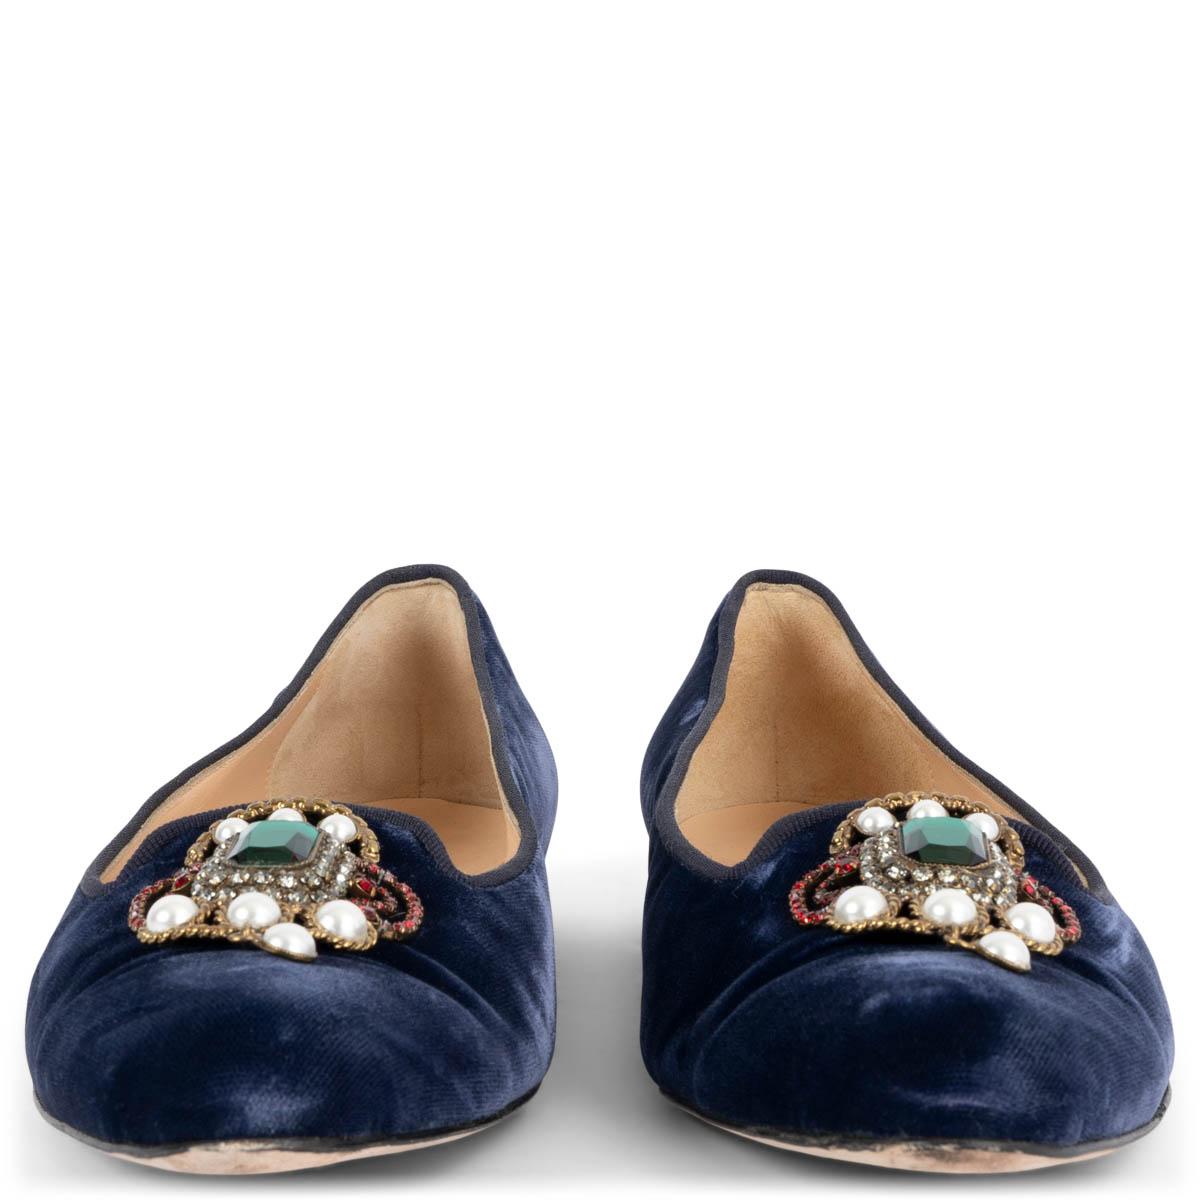 100% authentic Manolo Blahnik Eufrasia Limited Edition loafers in navy blue velvet embellished with faux pearls and rhinestones with one chunky green gem in the middle. Have been worn once or twice and are in excellent condition.